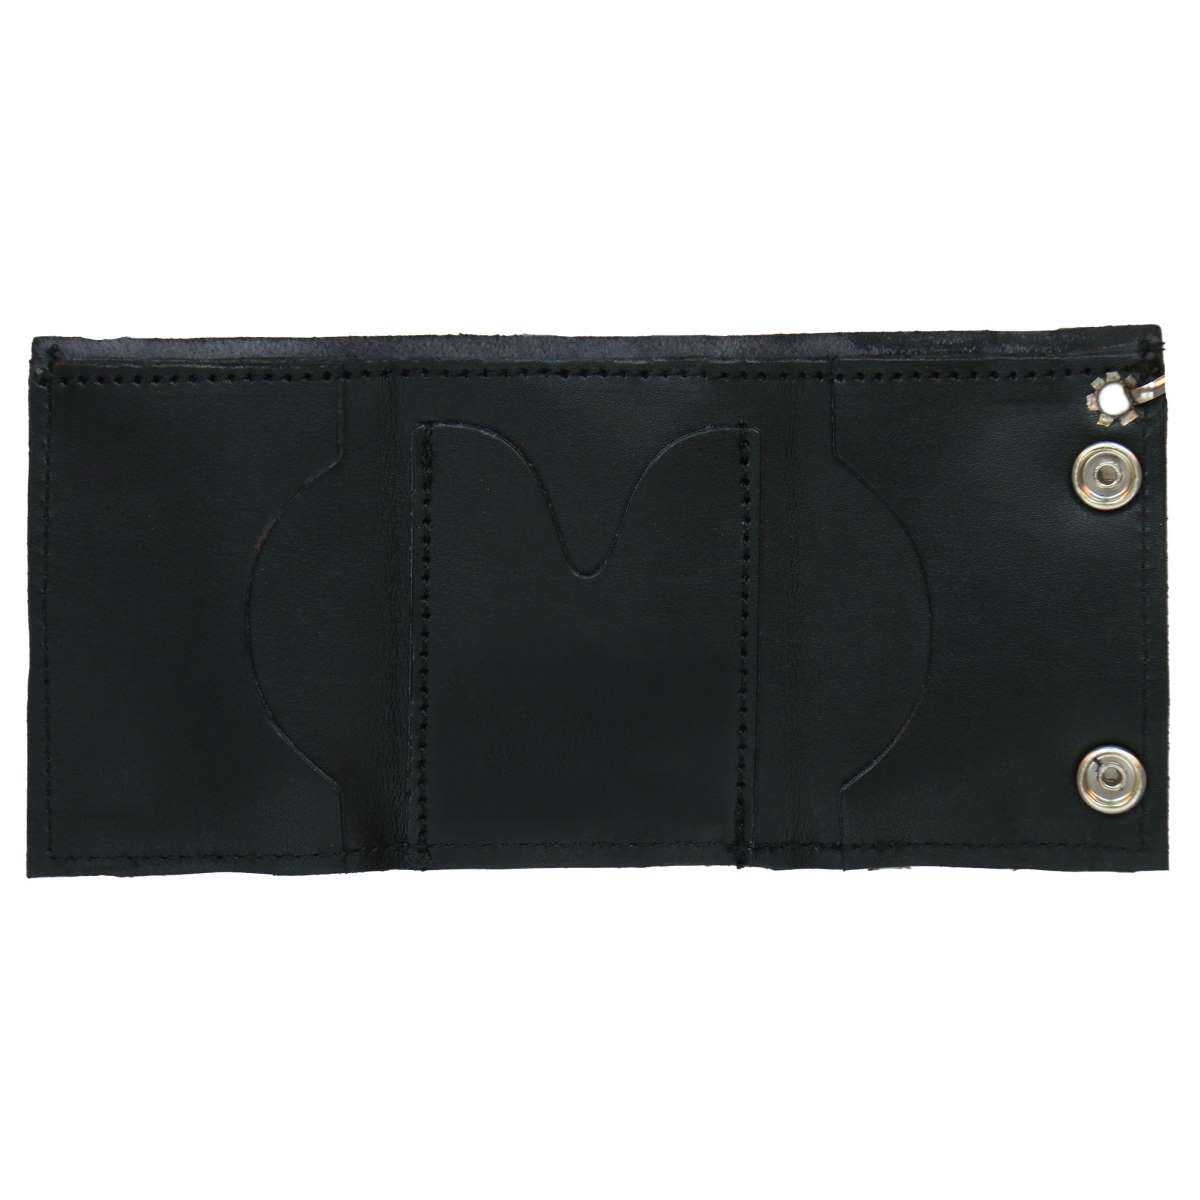 Hot Leathers Flame Wallet Tr-Fold Wallet WLB1003